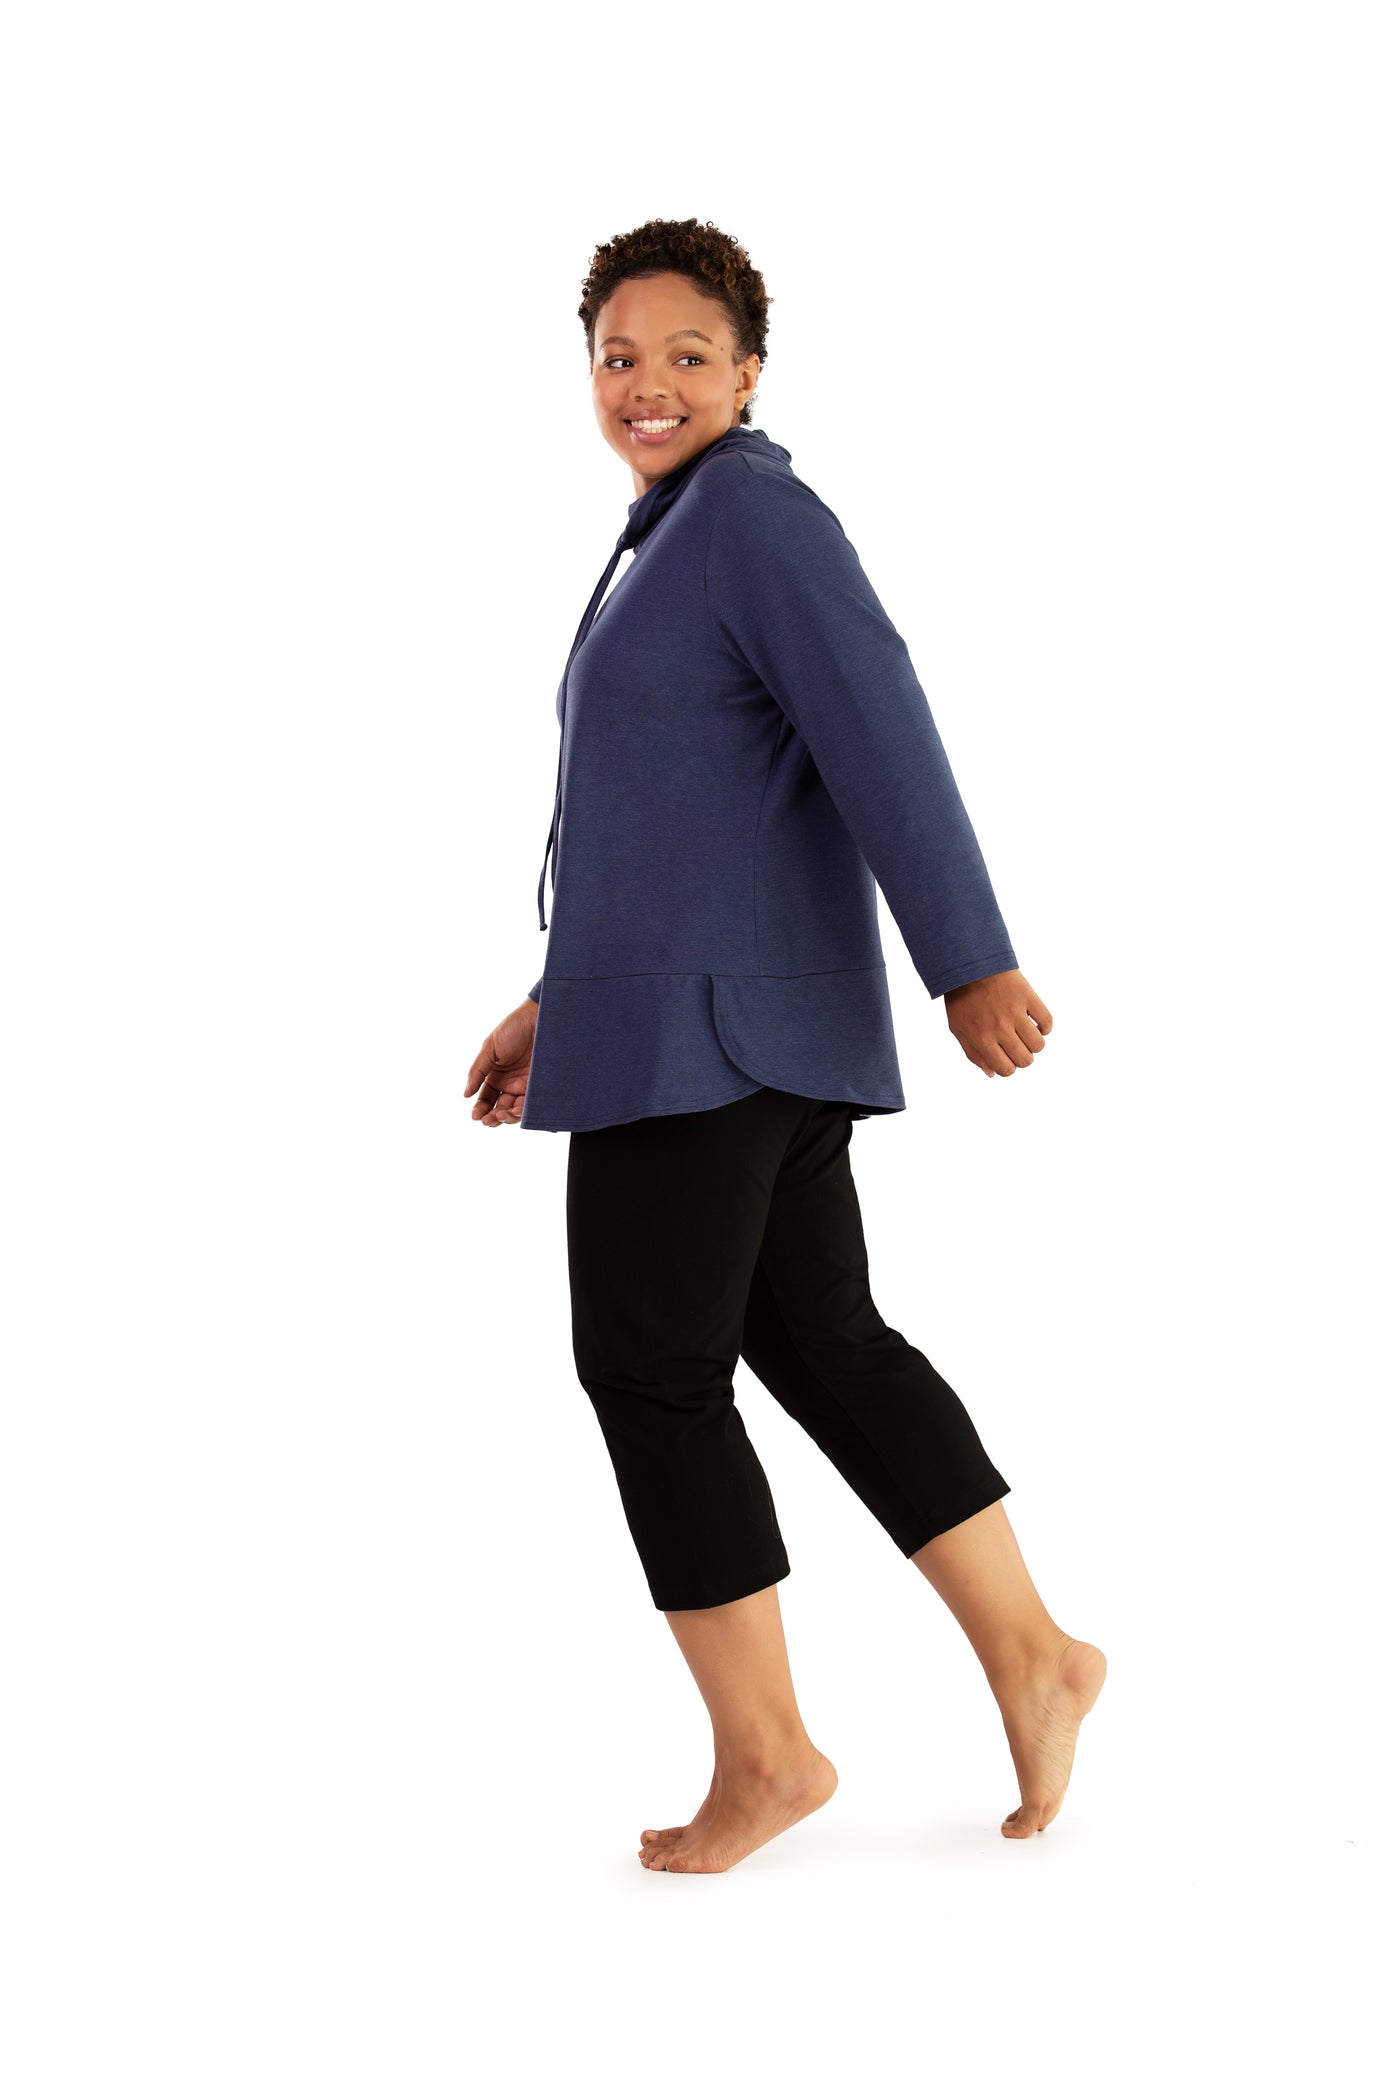 Plus size woman, walking back left looking forward, wearing JunoActive plus size Stretch Naturals Cowl Top in the color Denim Blue. She is wearing JunoActive Plus Size Capri Leggings in the color Black.